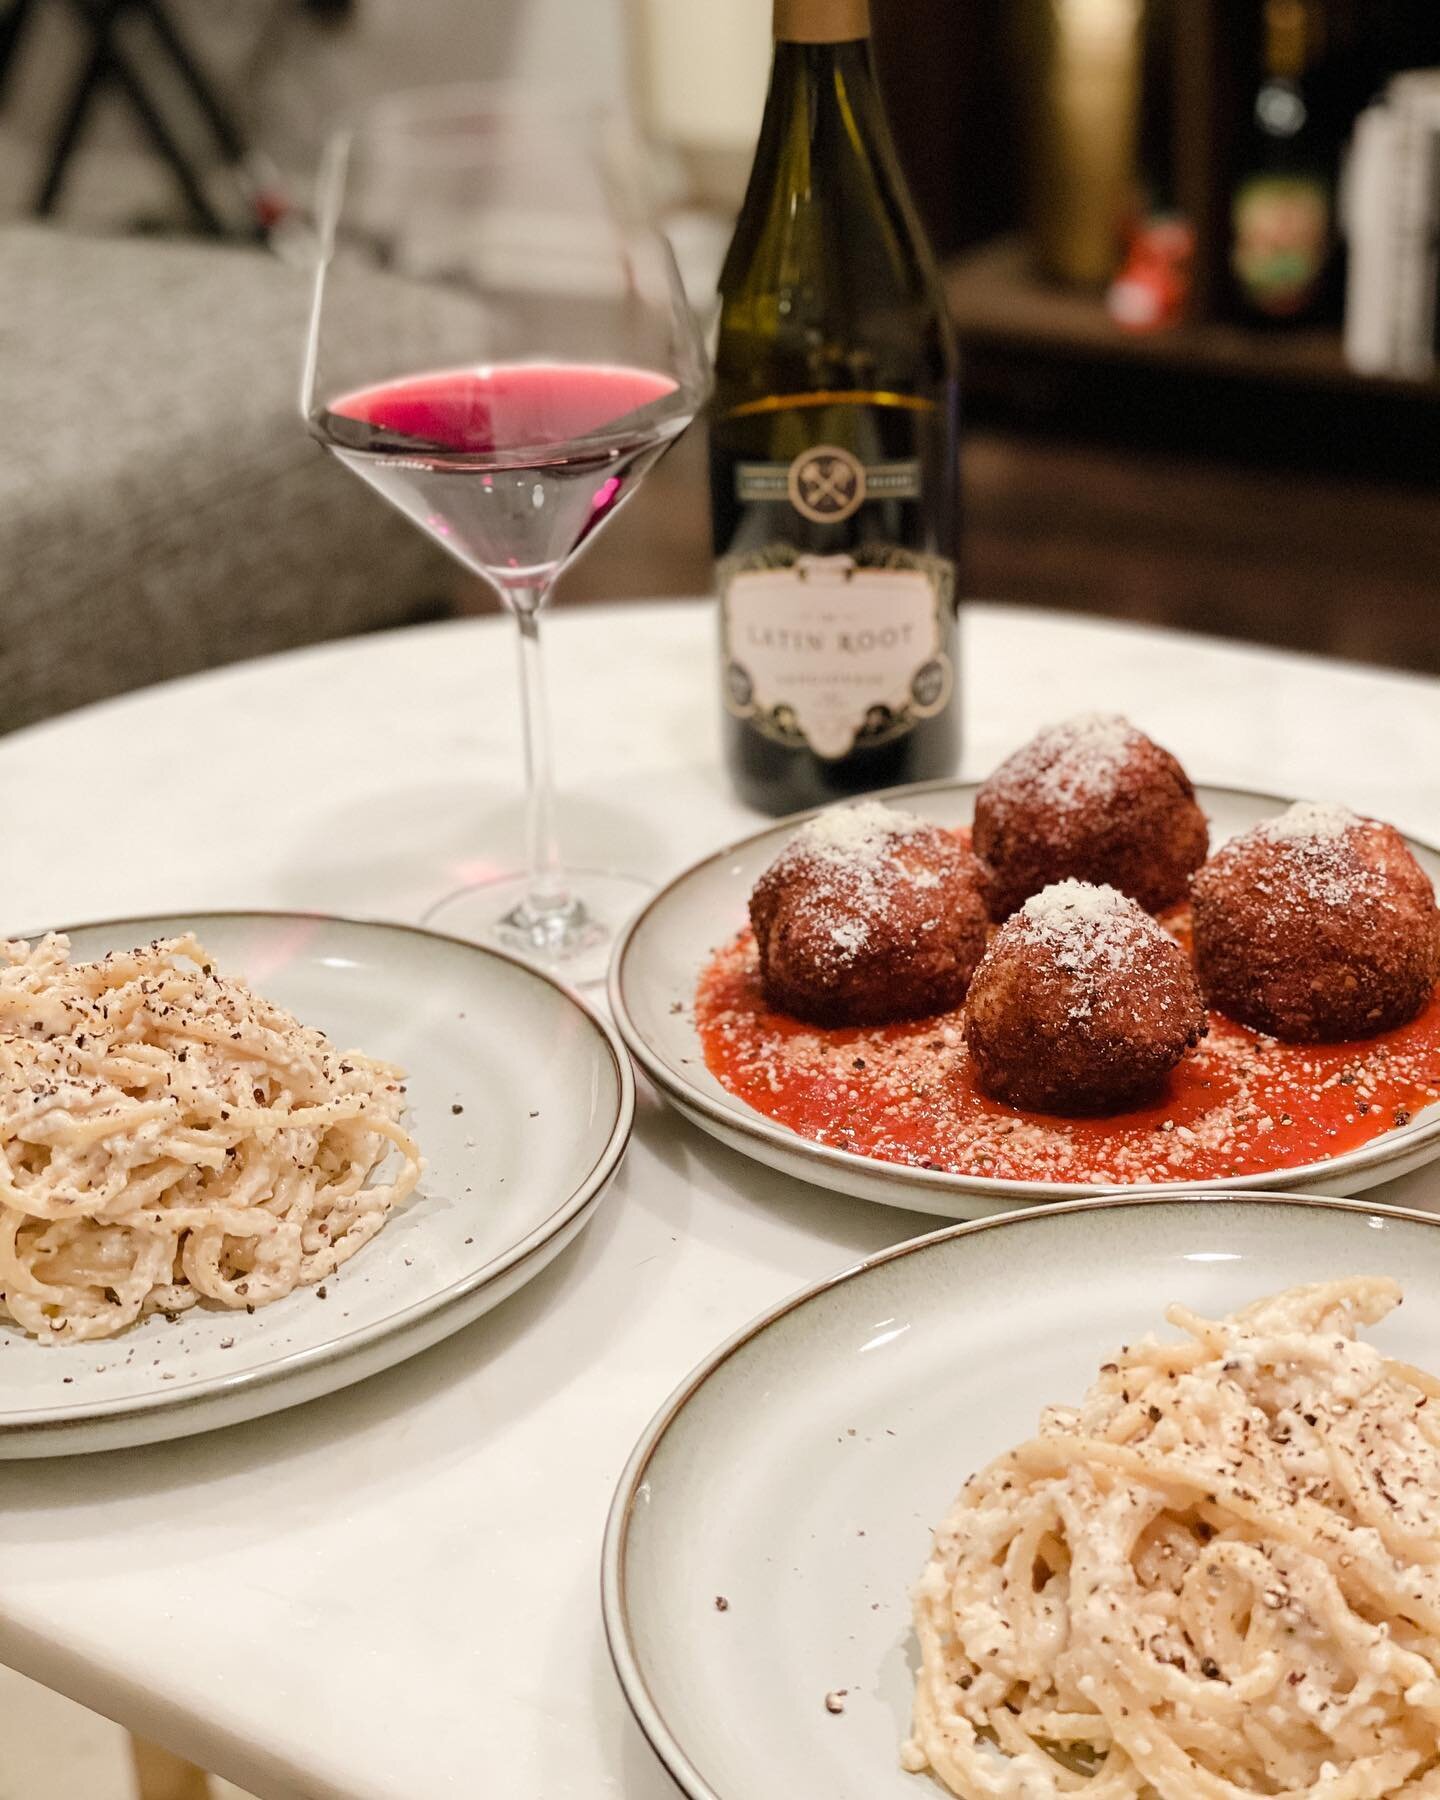 Ever have one of those weeks where you just need a pile of cacio e pepe, arancini &amp; a glass of wine right smack in the middle of it? 🙋&zwj;♀️ Us too! Plus B is finally watching Julia &amp; Julia tonight so chefdom was in the cards 🍷

This was o